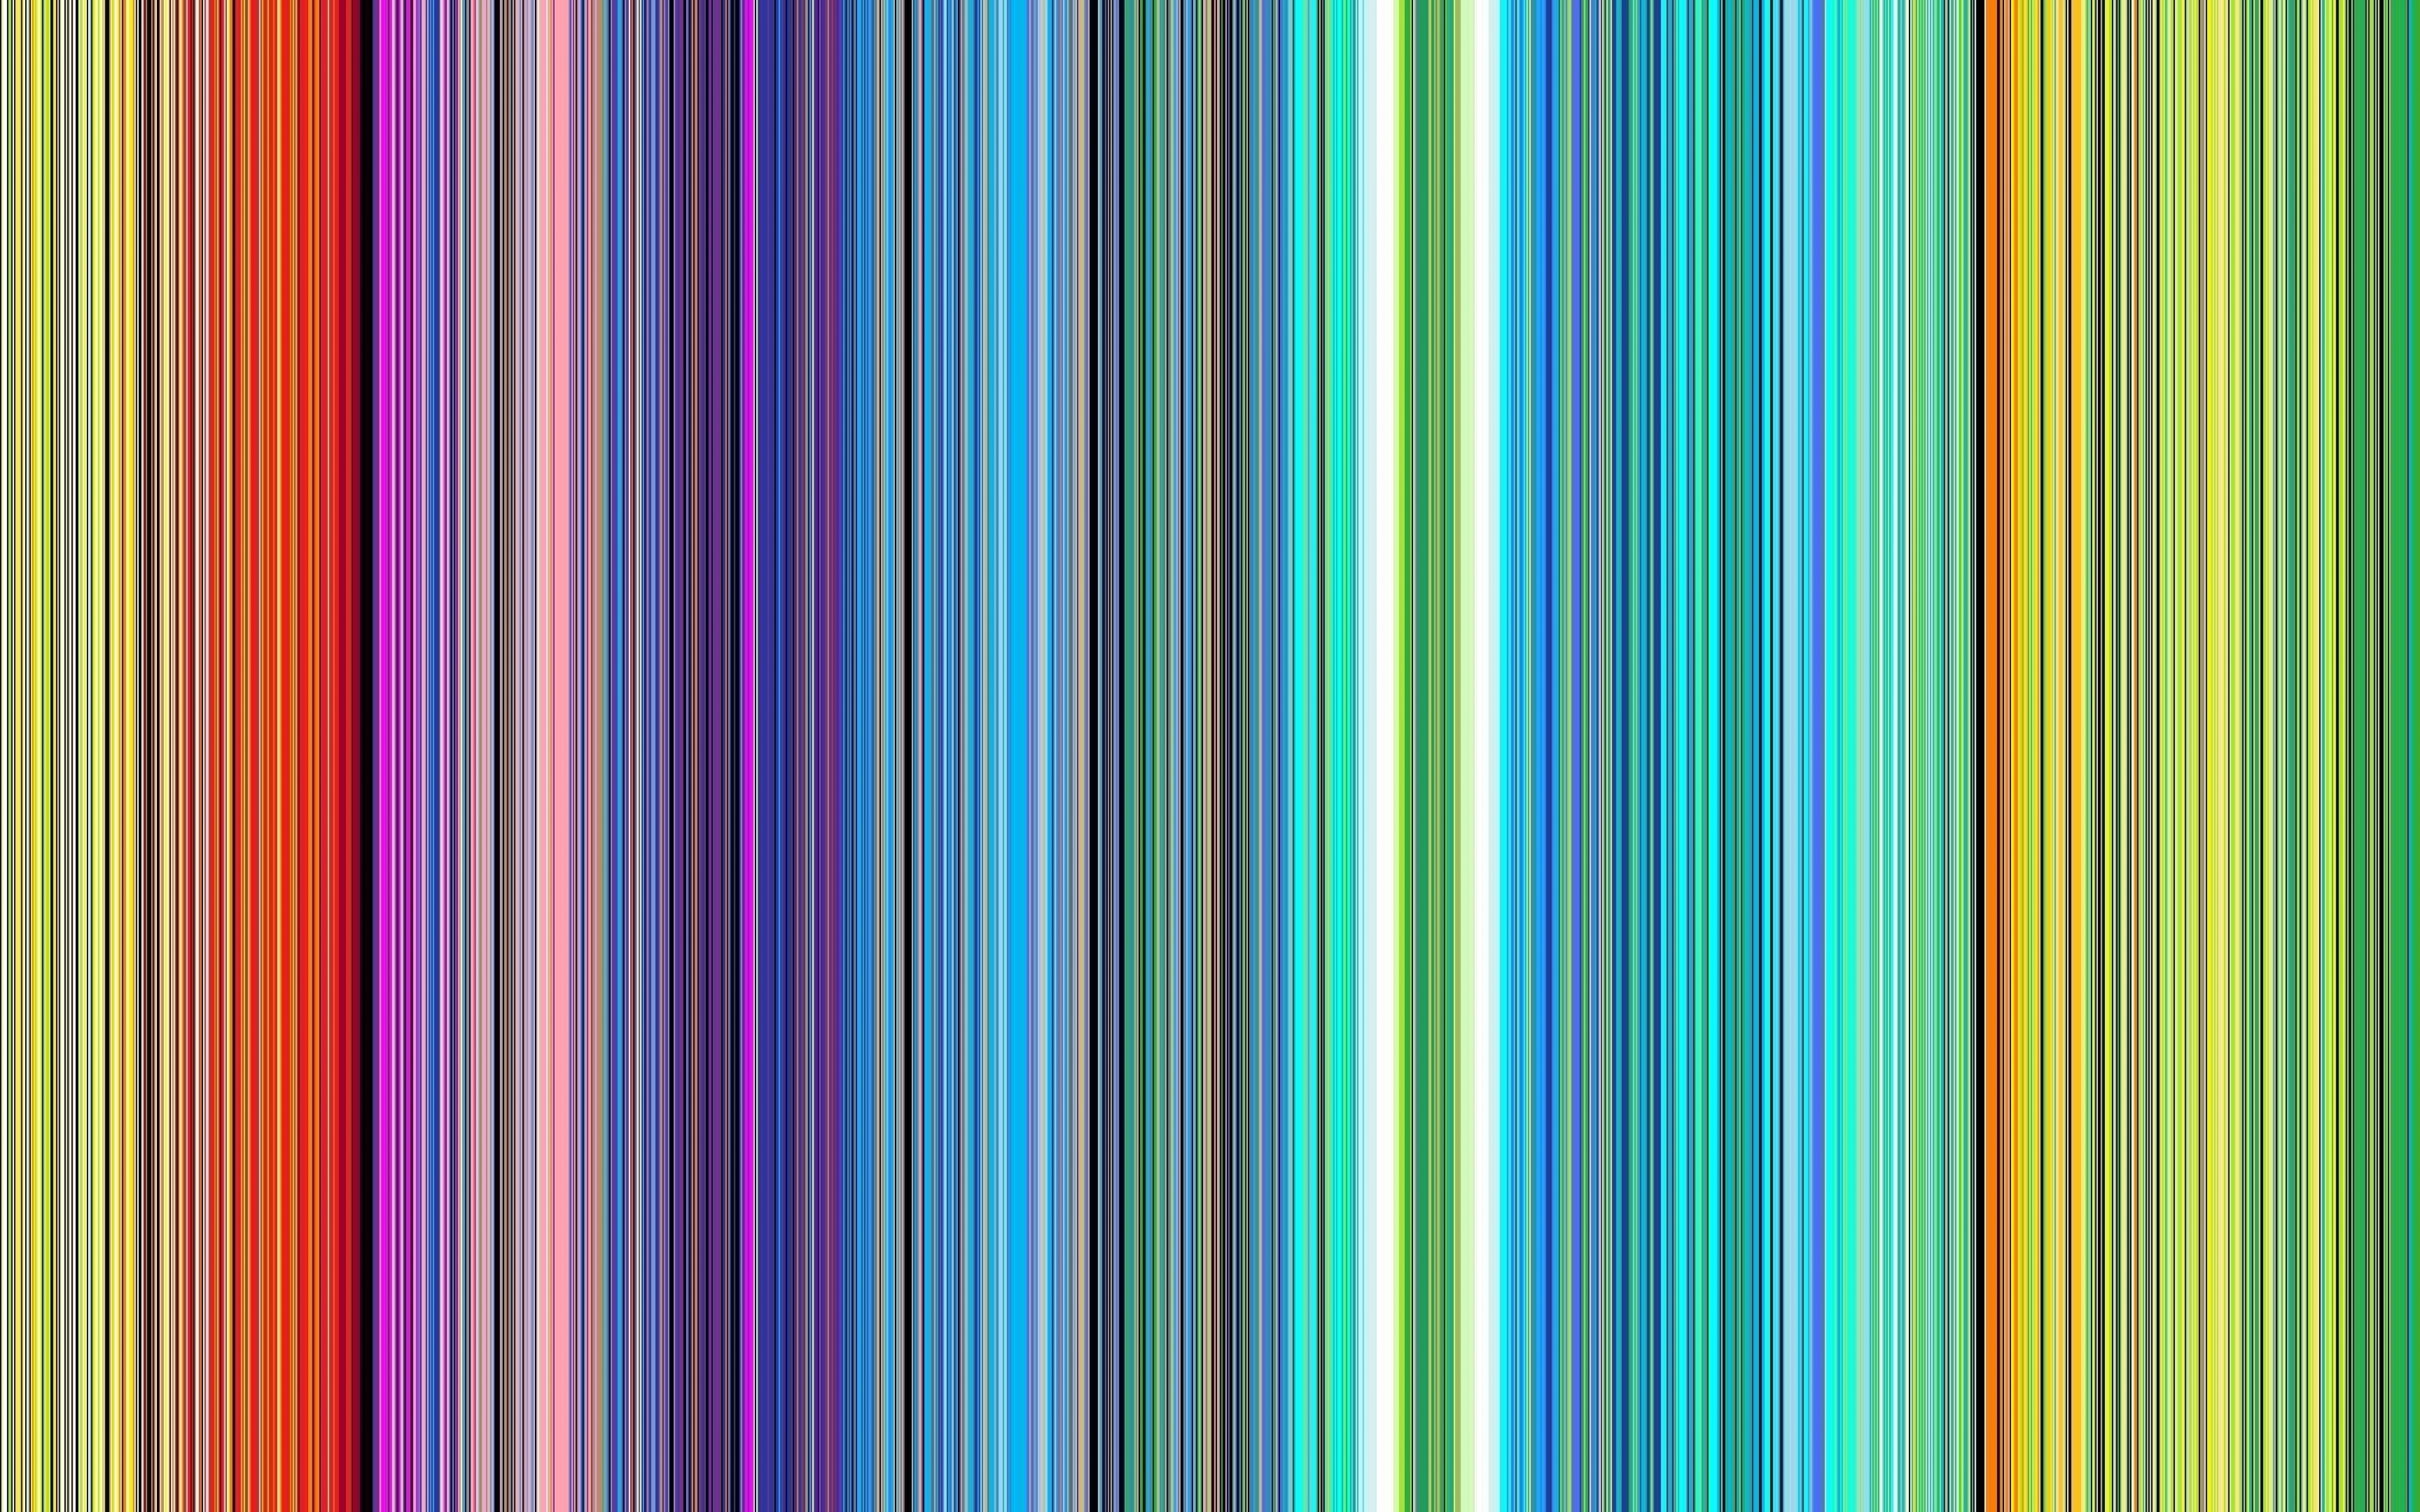 Download Wallpaper 3840x2400 lines stripes vertical multi colored